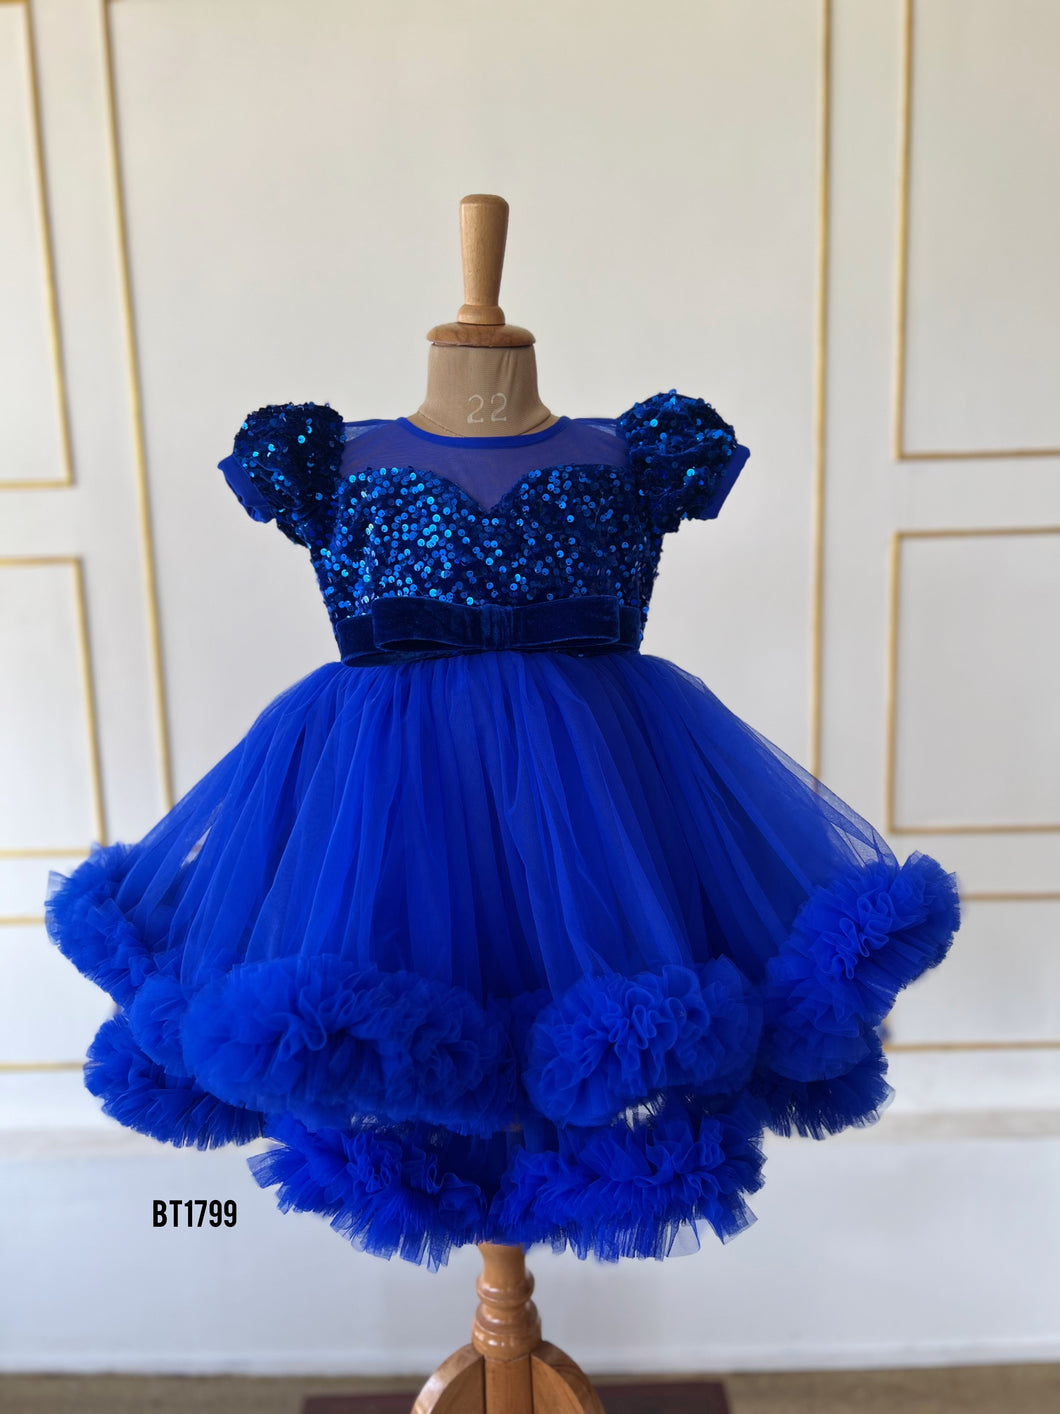 BT1799 Enchanted Sapphire Princess Gown - Exquisite Party Dress for Little One